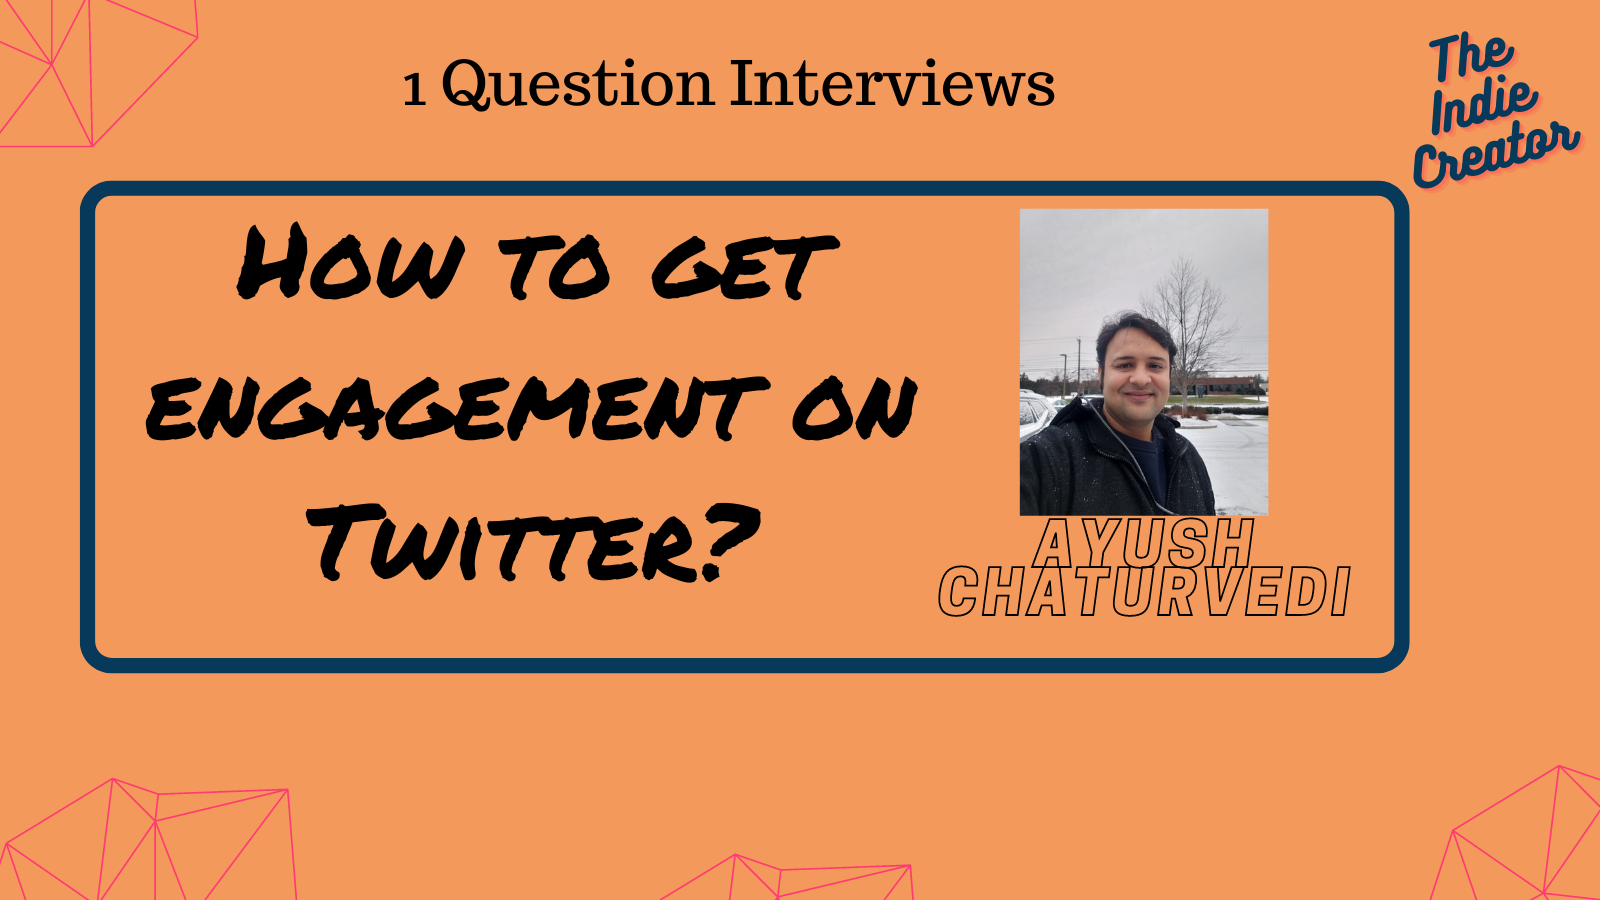 How to get engagement on Twitter